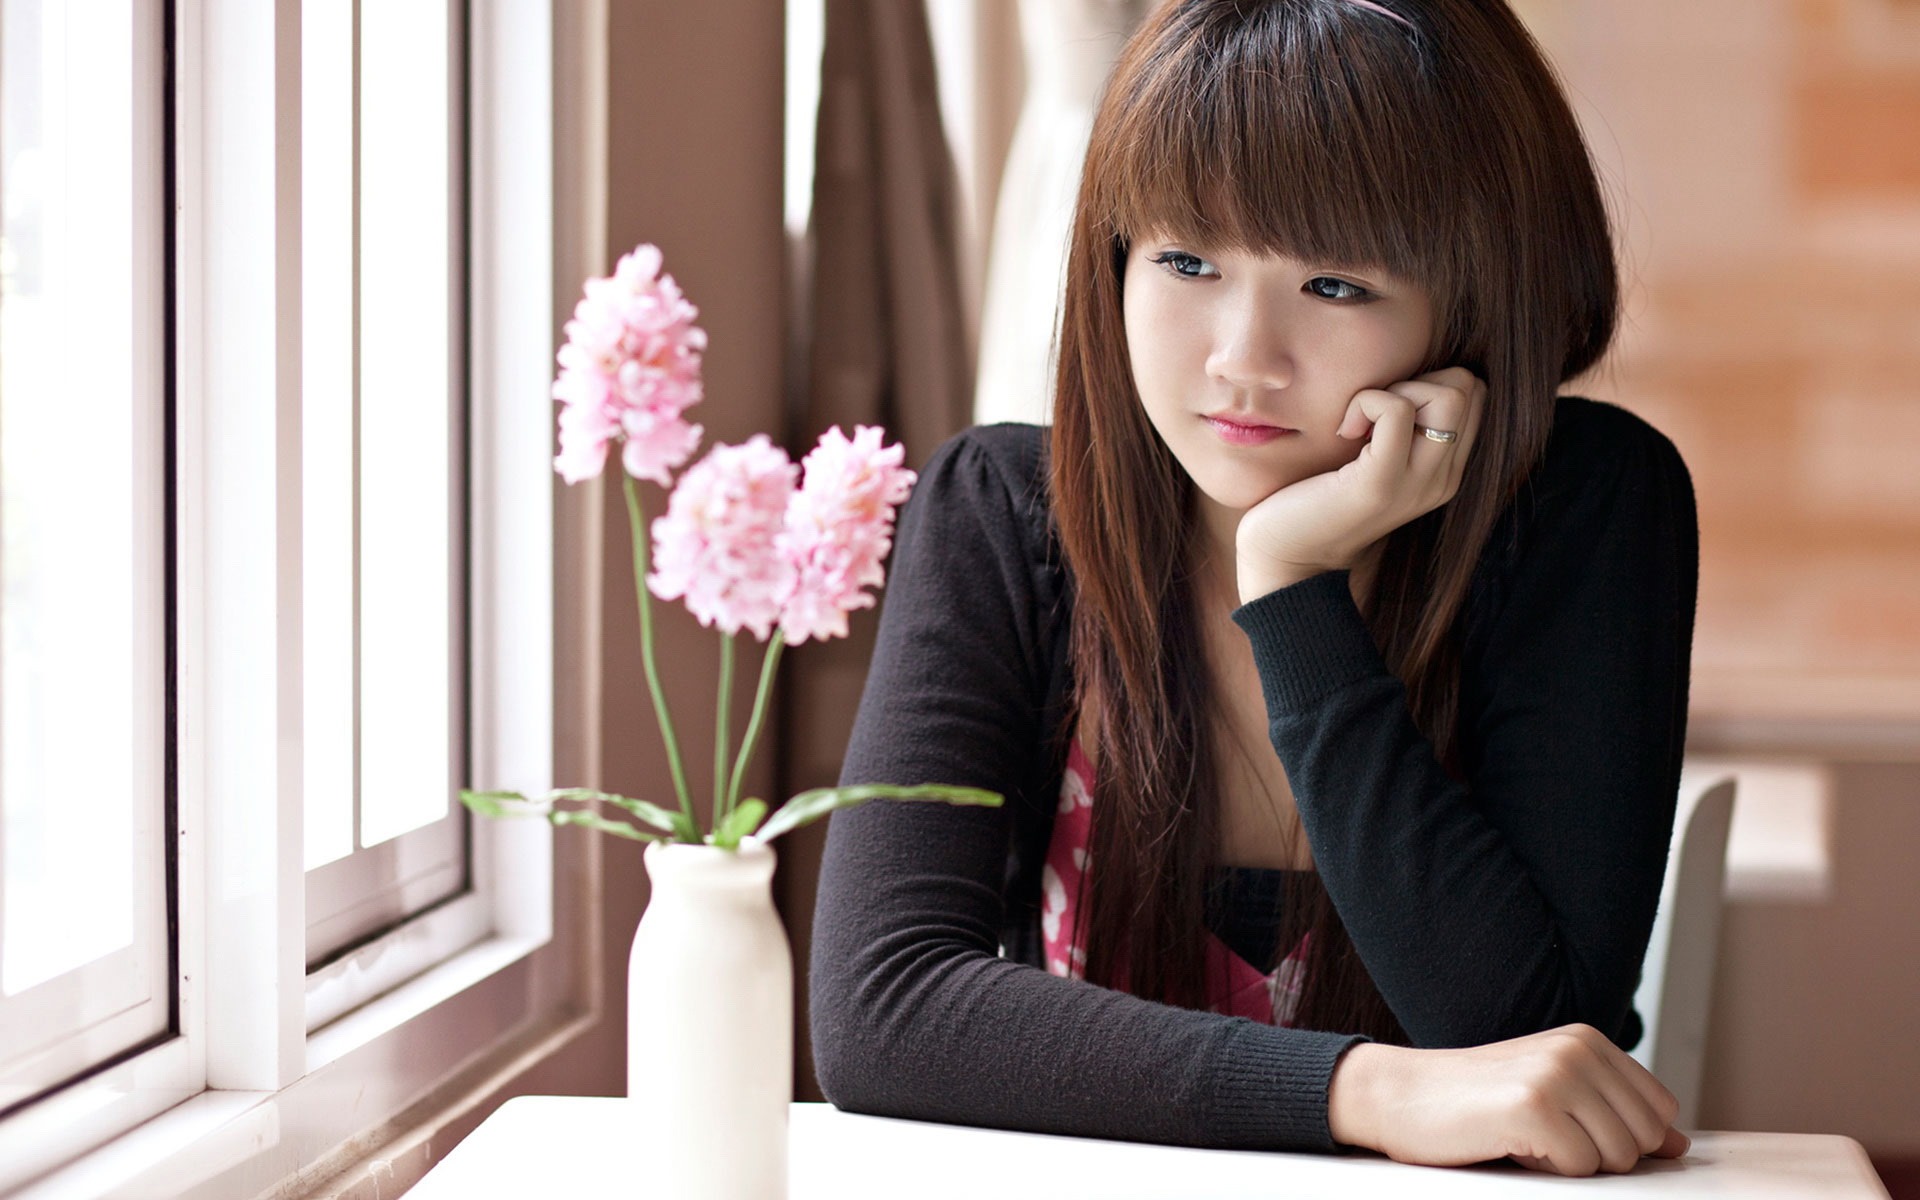 Pure and lovely young Asian girl HD wallpapers collection (2) #24 - 1920x1200